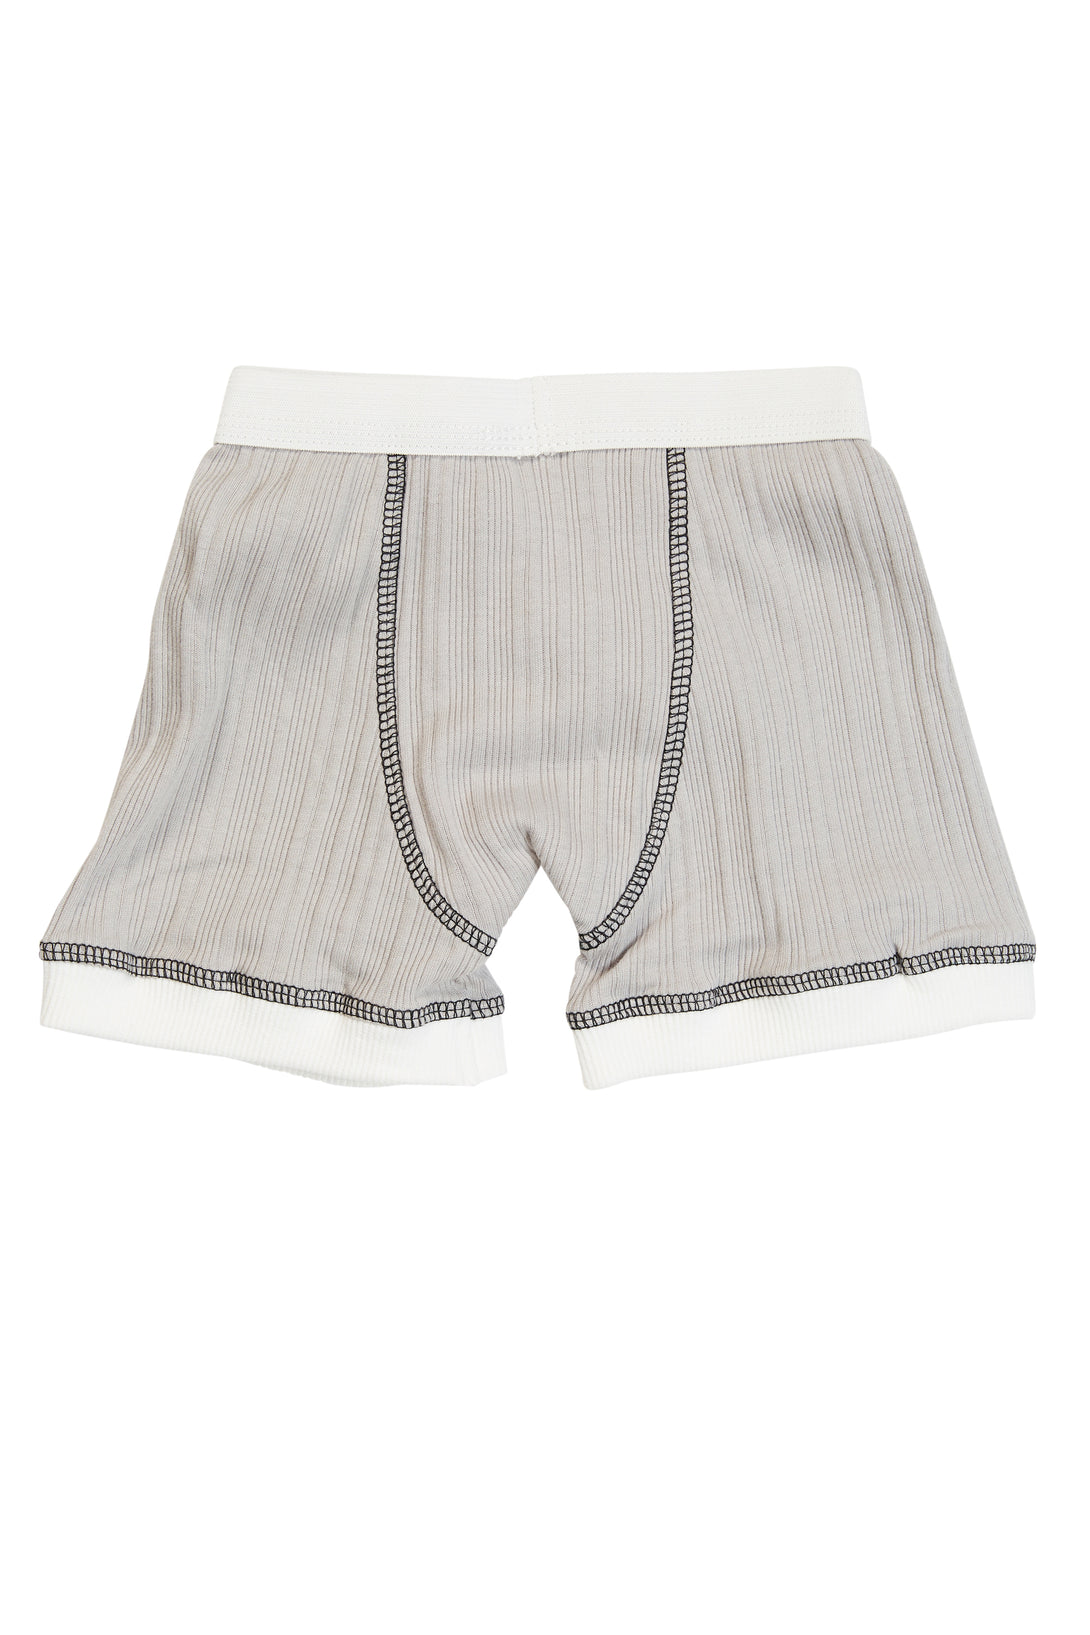 An image of Knuckleheads Logo Light Grey Skivvies for Kids, showcasing stylish black underwear with the iconic Knuckleheads logo. These comfortable and trendy undergarments are perfect for children, combining fashion and comfort seamlessly.